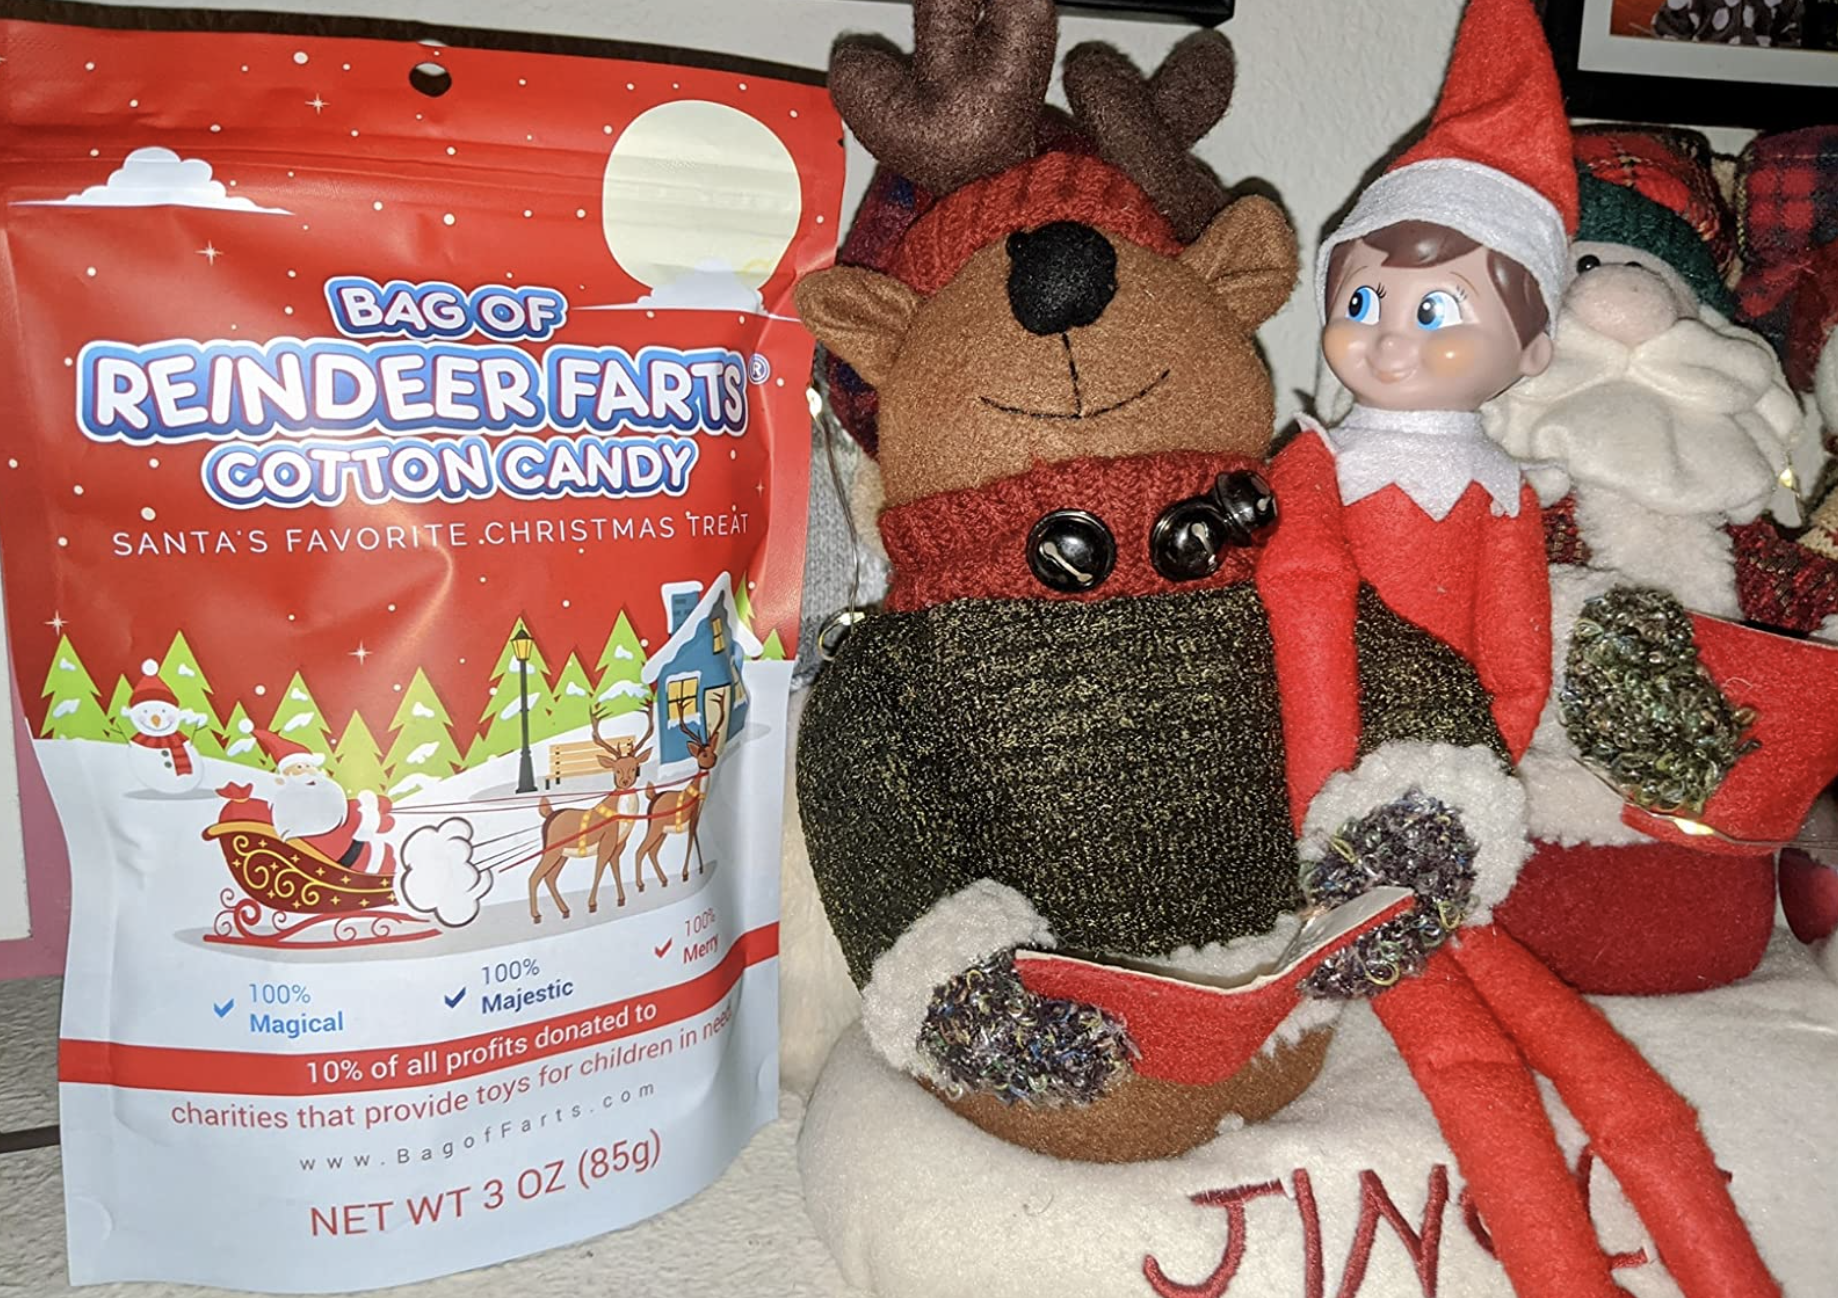 A customer review photo of the bag of cotton candy next to their Elf On The Shelf